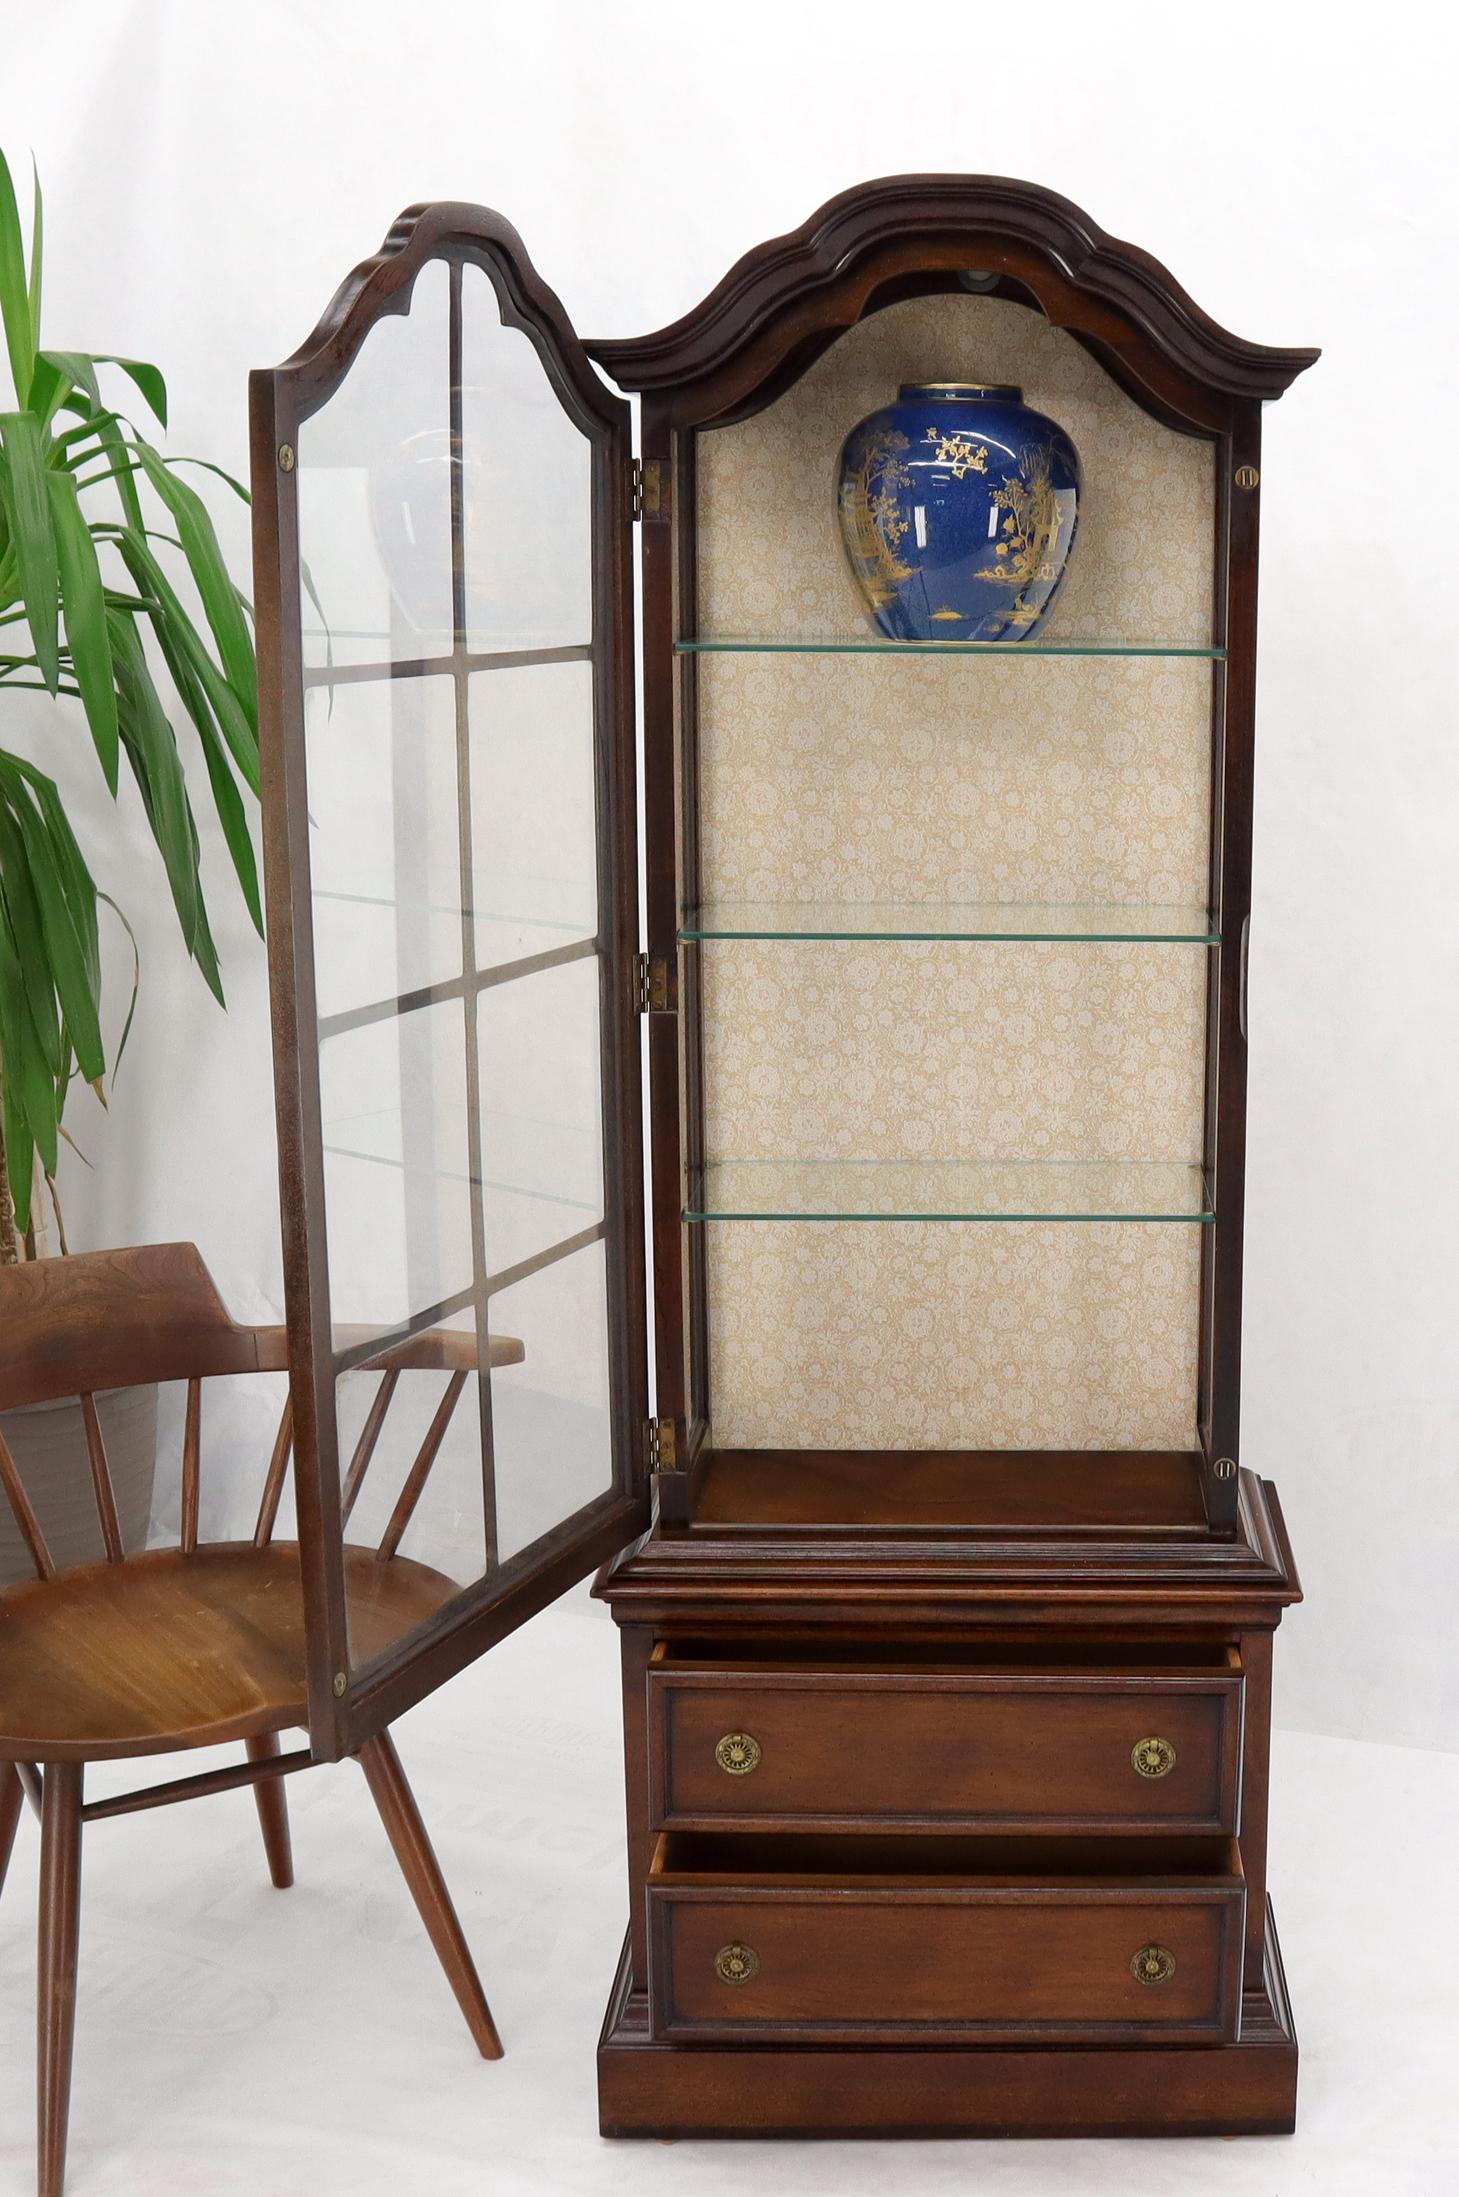 Dome Shape Top Glass Shelves Two Drawer Compartment Curio Display Cabinet In Good Condition For Sale In Rockaway, NJ